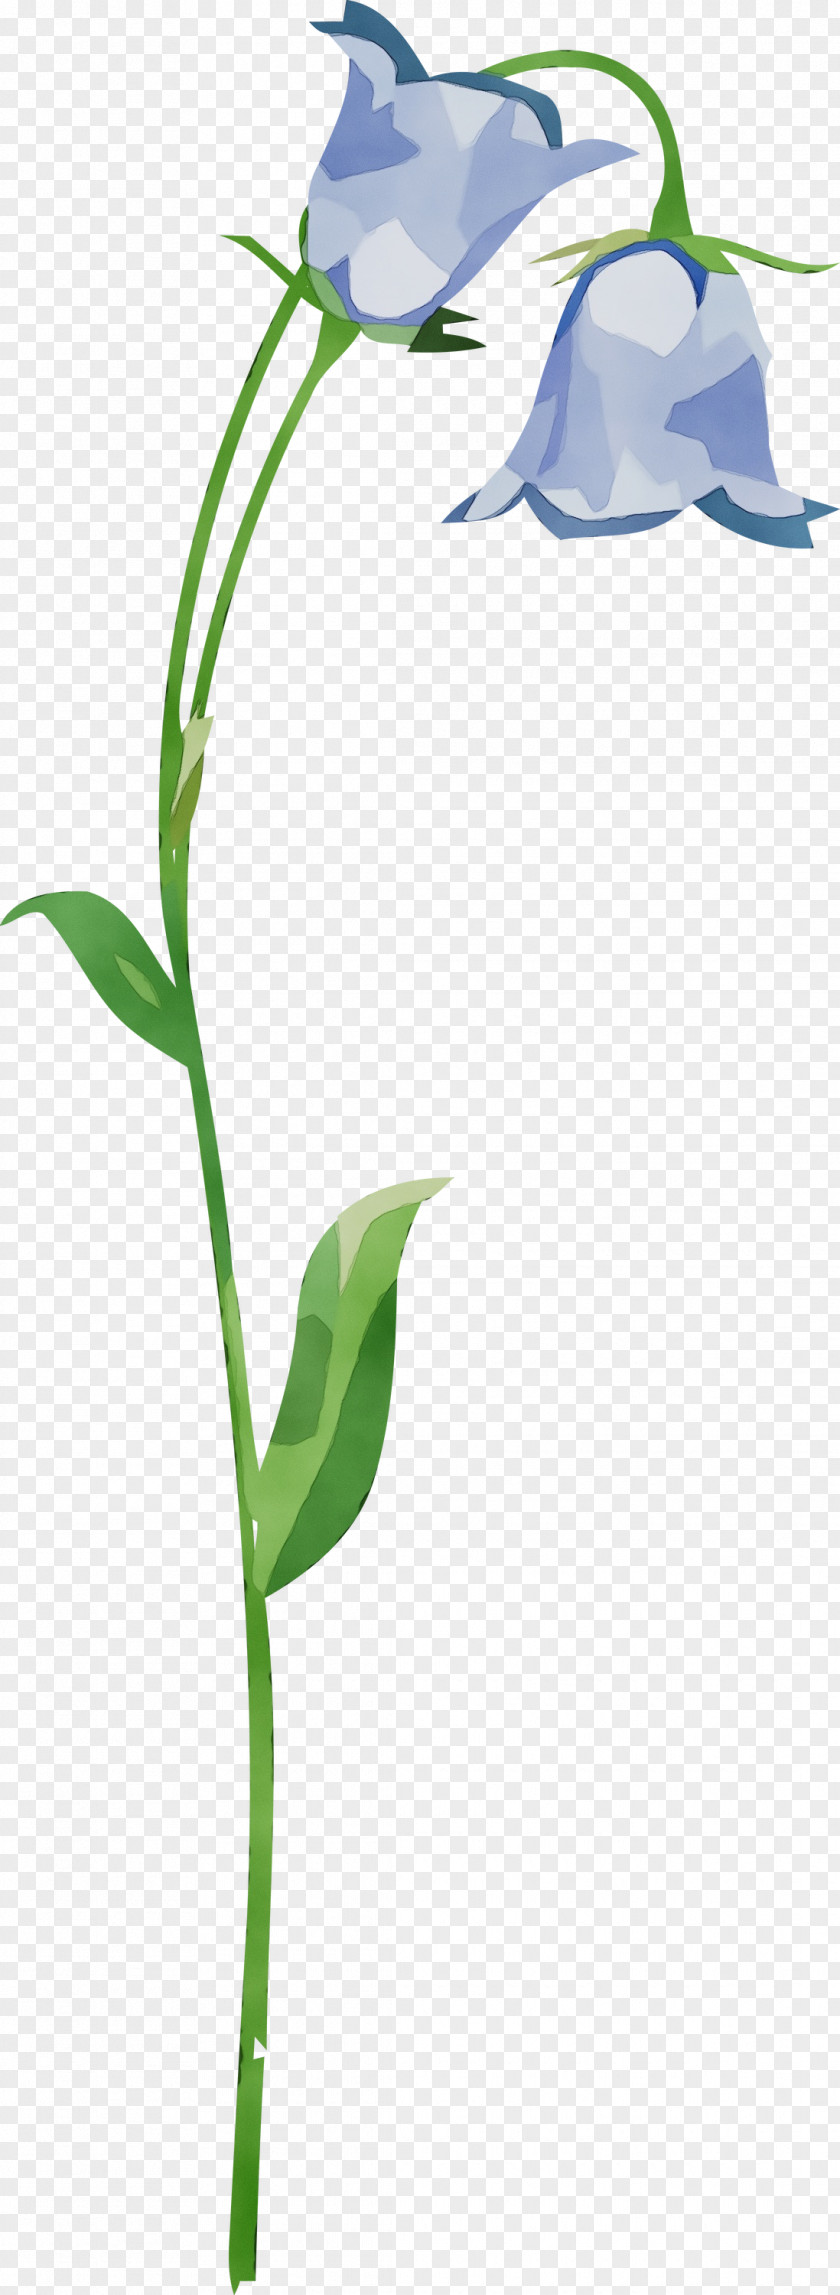 Morning Glory Flower Cut Flowers Icon Leaf PNG